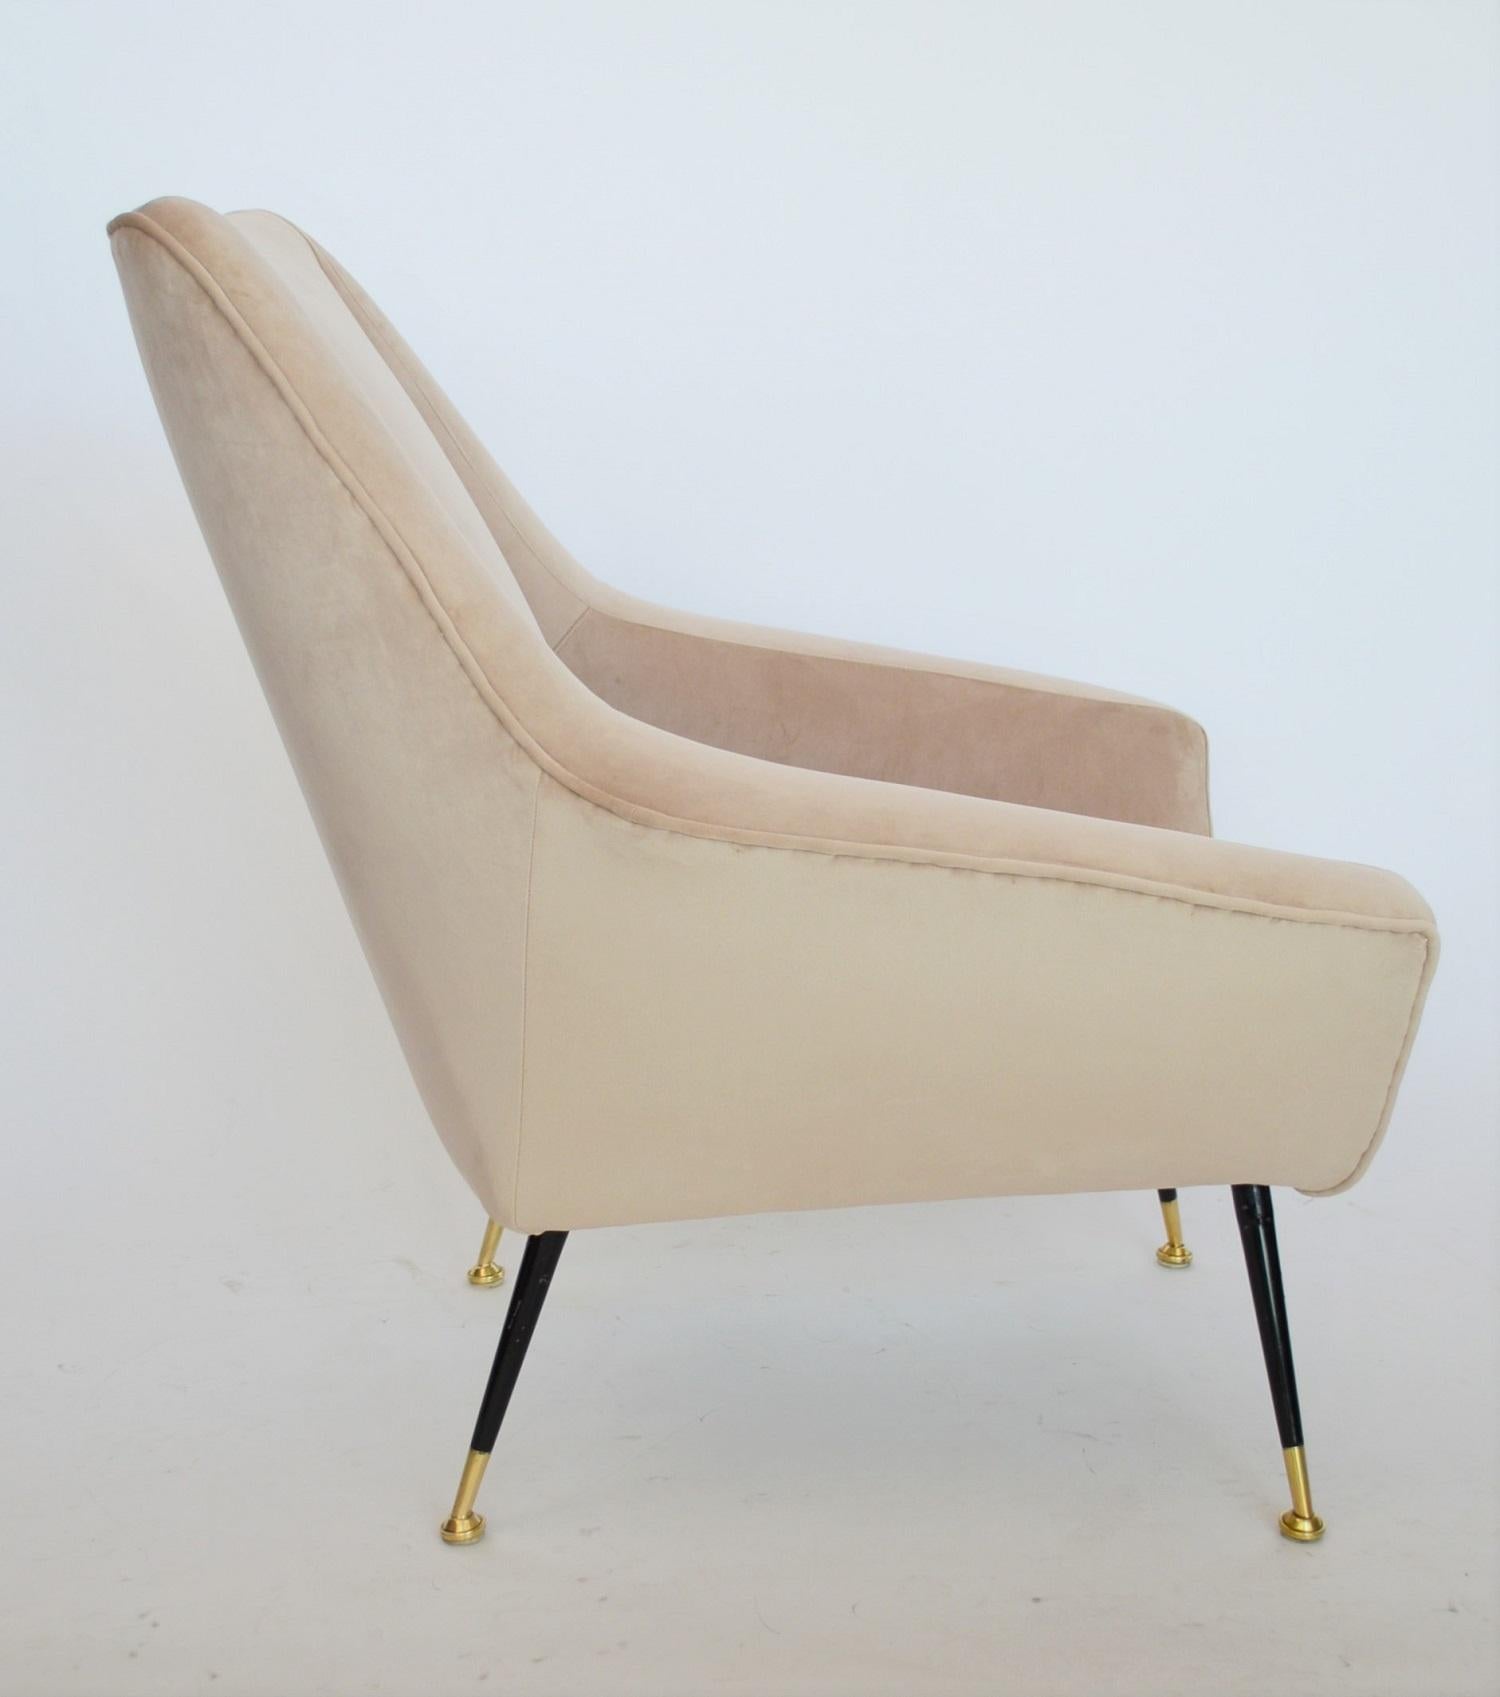 Polished Italian Midcentury Armchair in Taupe Velvet and Brass, 1950s